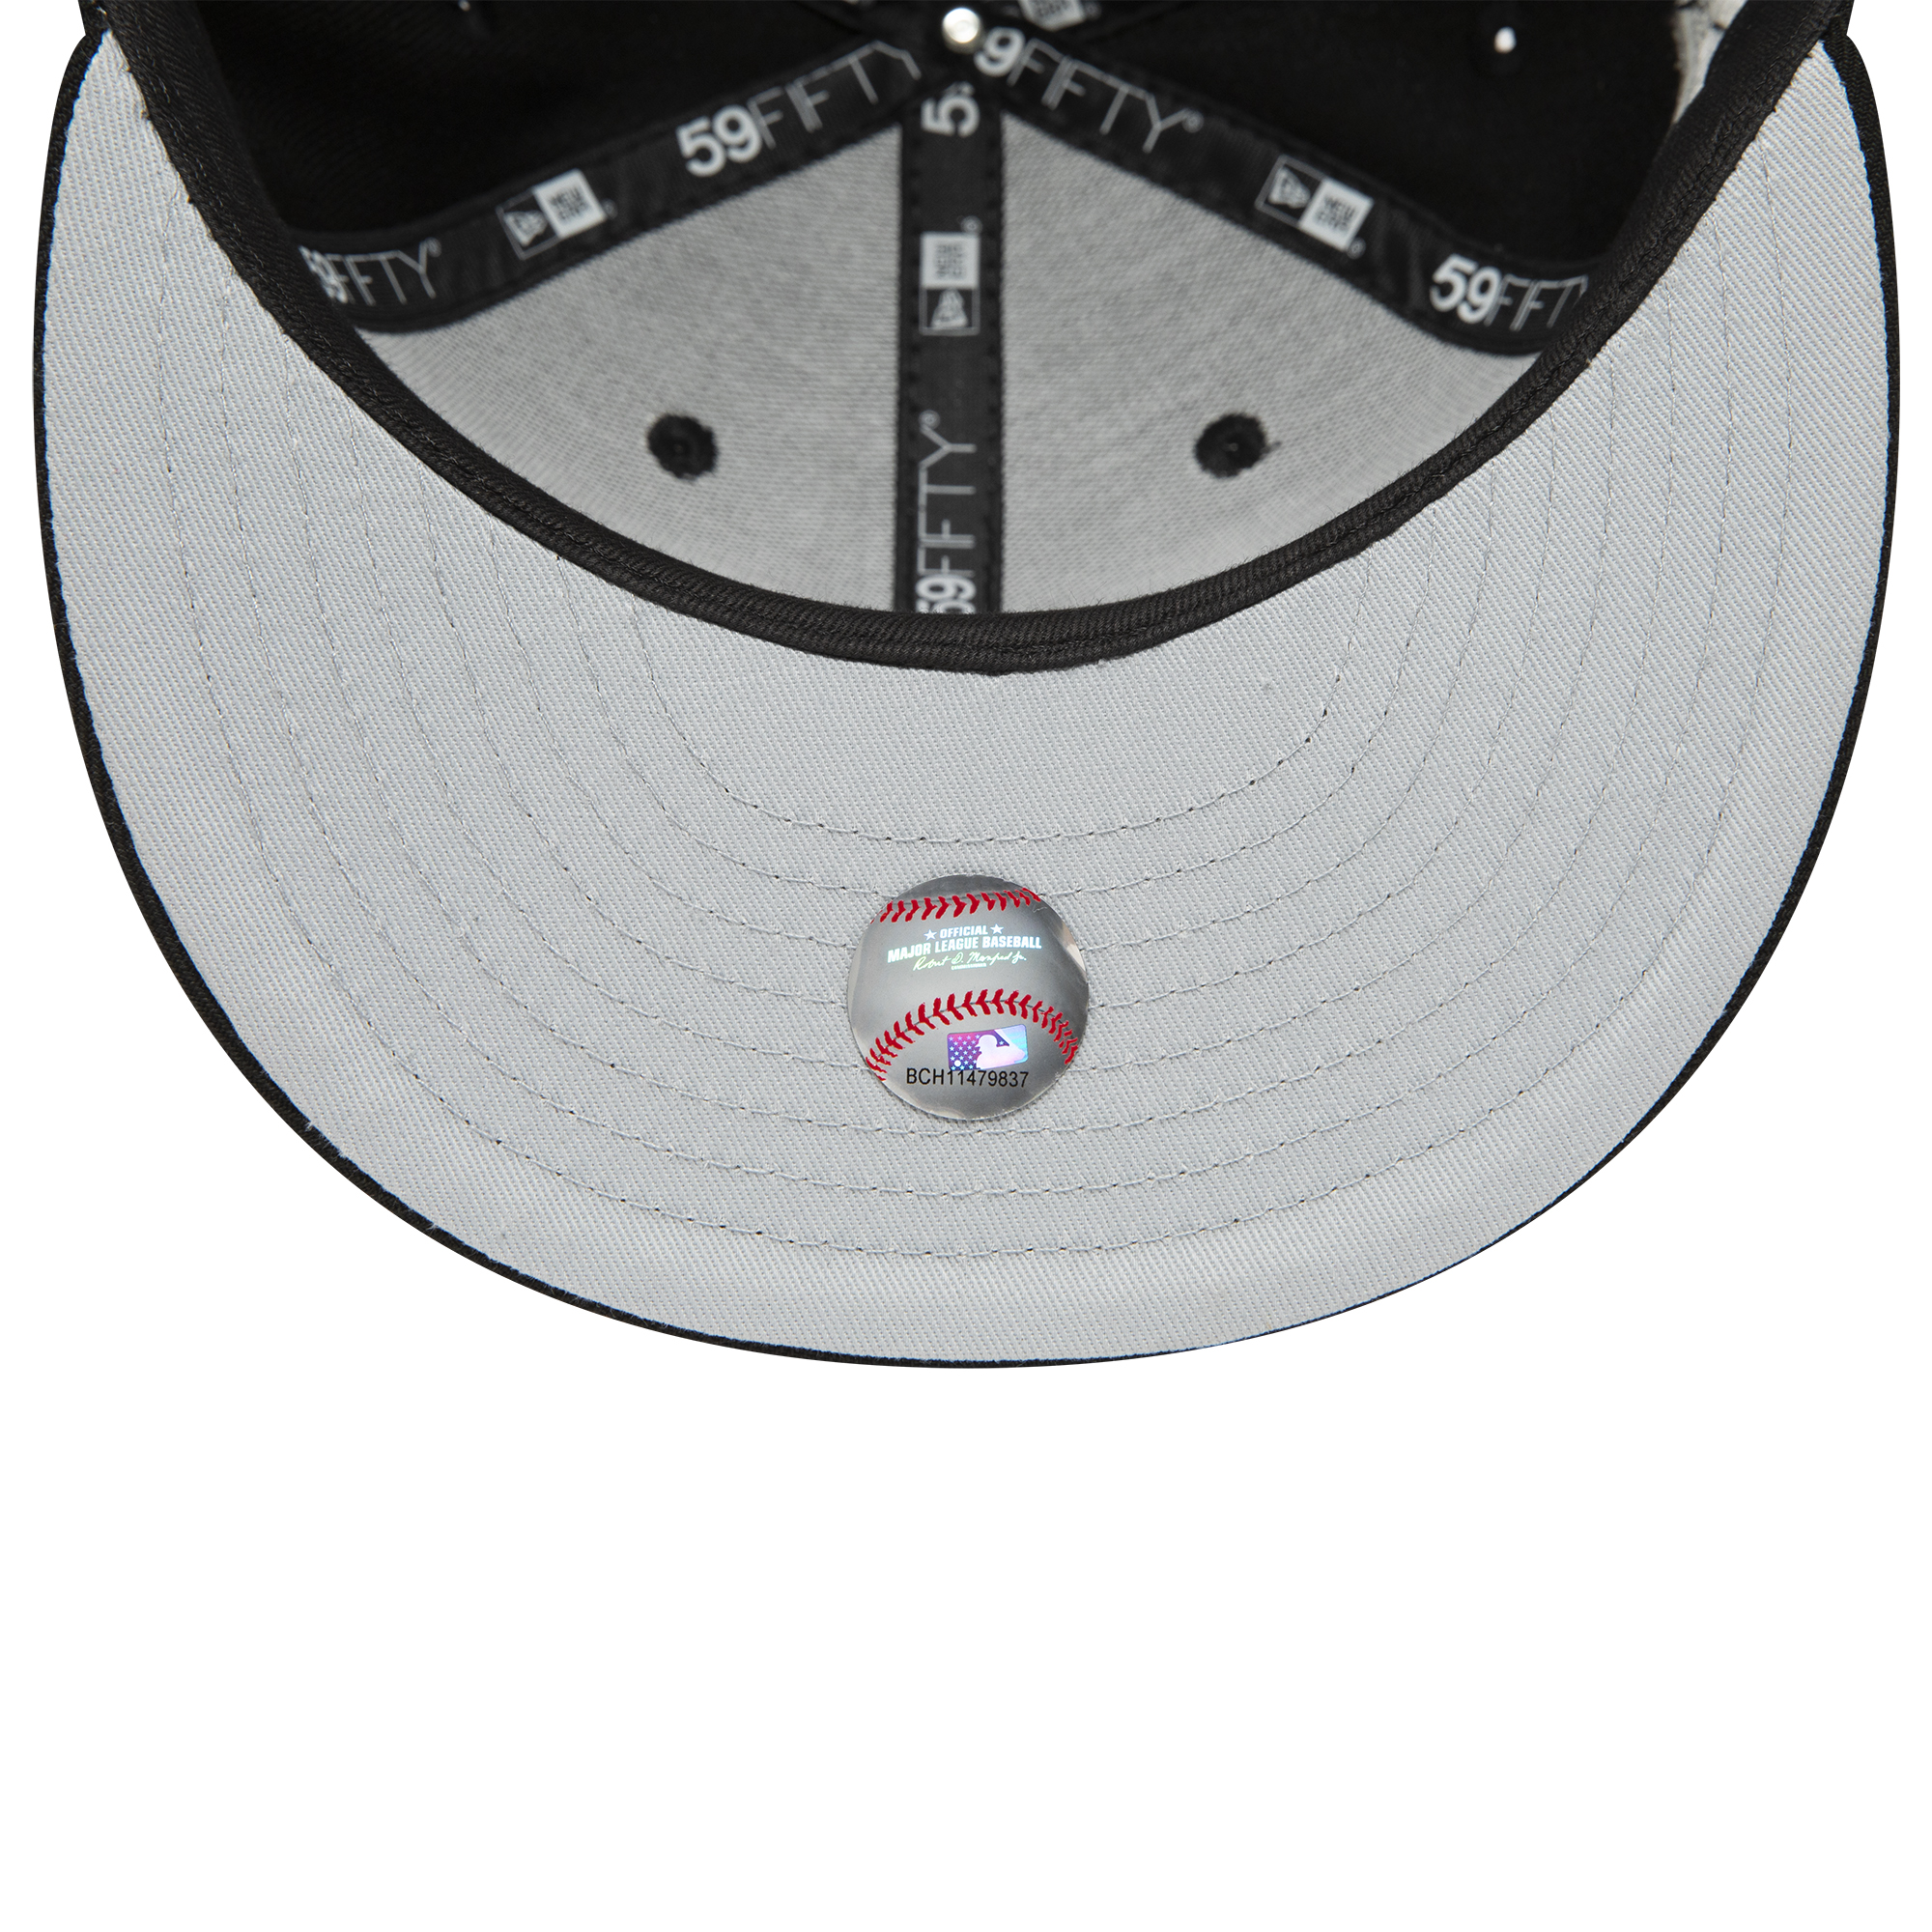 White Sox New Era 59FIFTY Fitted Glow Undervisor Black Hat